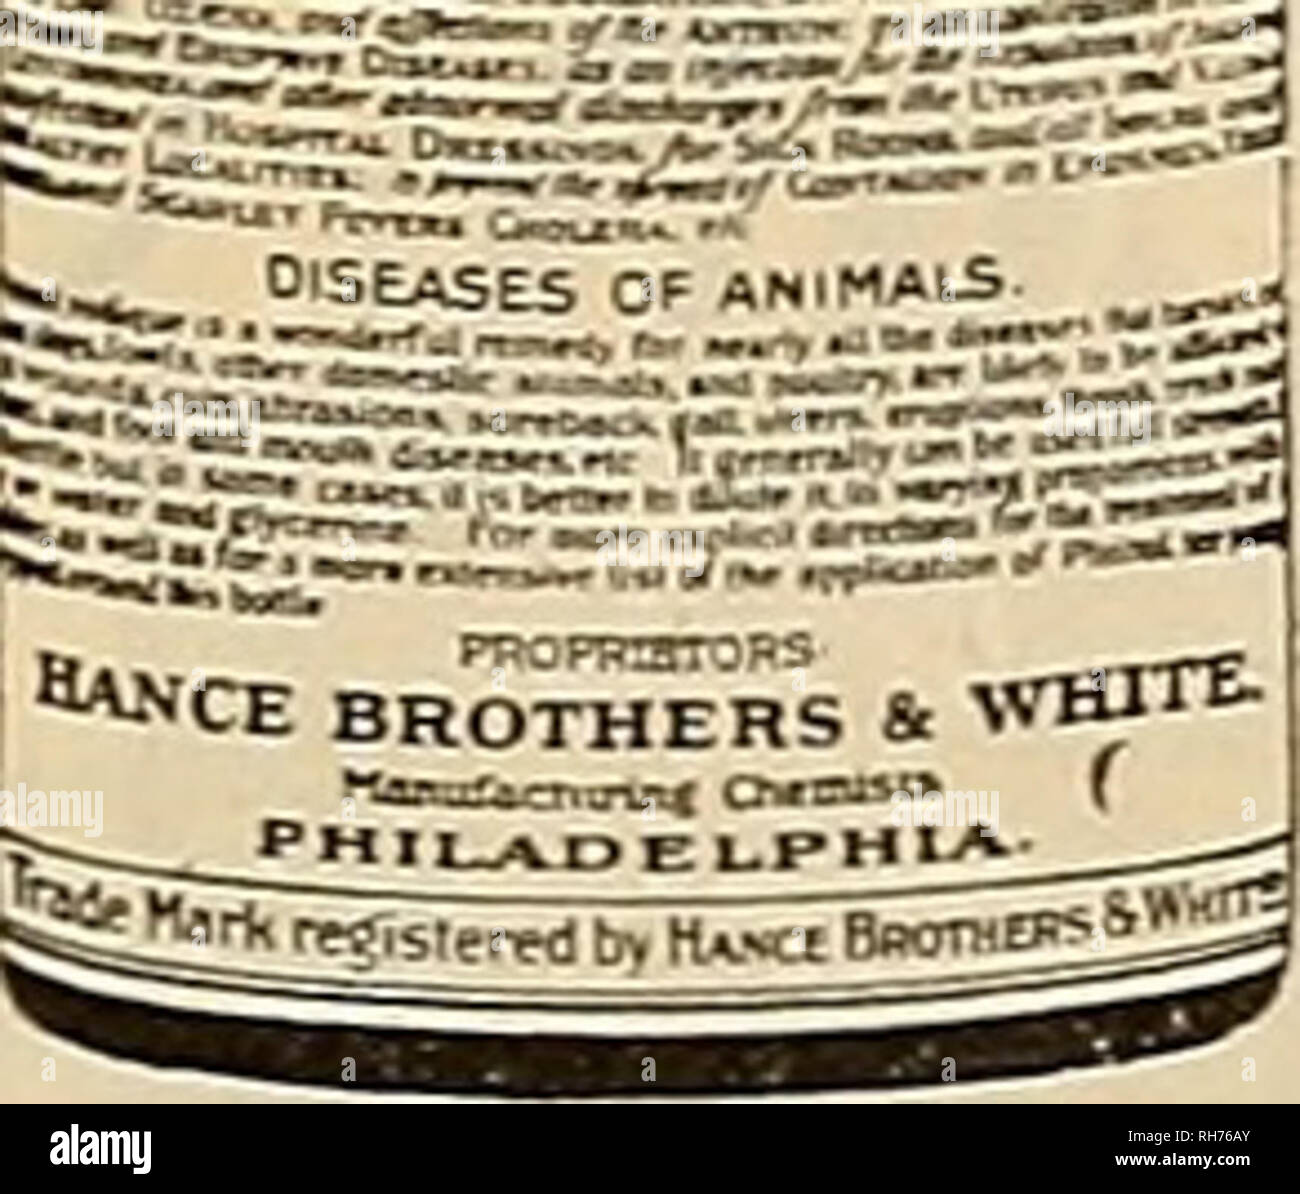 . Breeder and sportsman. Horses. iioals CUTS, BURNS and SORES, THE BEST Antiseptic Dressing for Â«ntil Man or Beast. I TULARE RACE TRACK 1 I AND GROUNDS I FOR SALE. â¢! V Qn ACRES LAND ENCLOSED WITH f â¢ JU high board fence; 60 bos stalls; 300 â¢ J, feet open stalls; tankhouse and 3000-gaJlon 0 X tank; engine and pump complete; 10 acres X &quot;0. alfalfa: fl-room house: adjoining City of T tK Tulare; grand stand for 2000 people. Â§g PRICE S7O0O. SP Address ^ BREEDER AND SPORTSMAN, W T 36 Geary St., San Francisco, Cal. Y FOR SALE. Fast Paclns; Stallion JOIIN A. 2:18 3-* ir^Lywu,0M Â«:l4&gt;; s Stock Photo